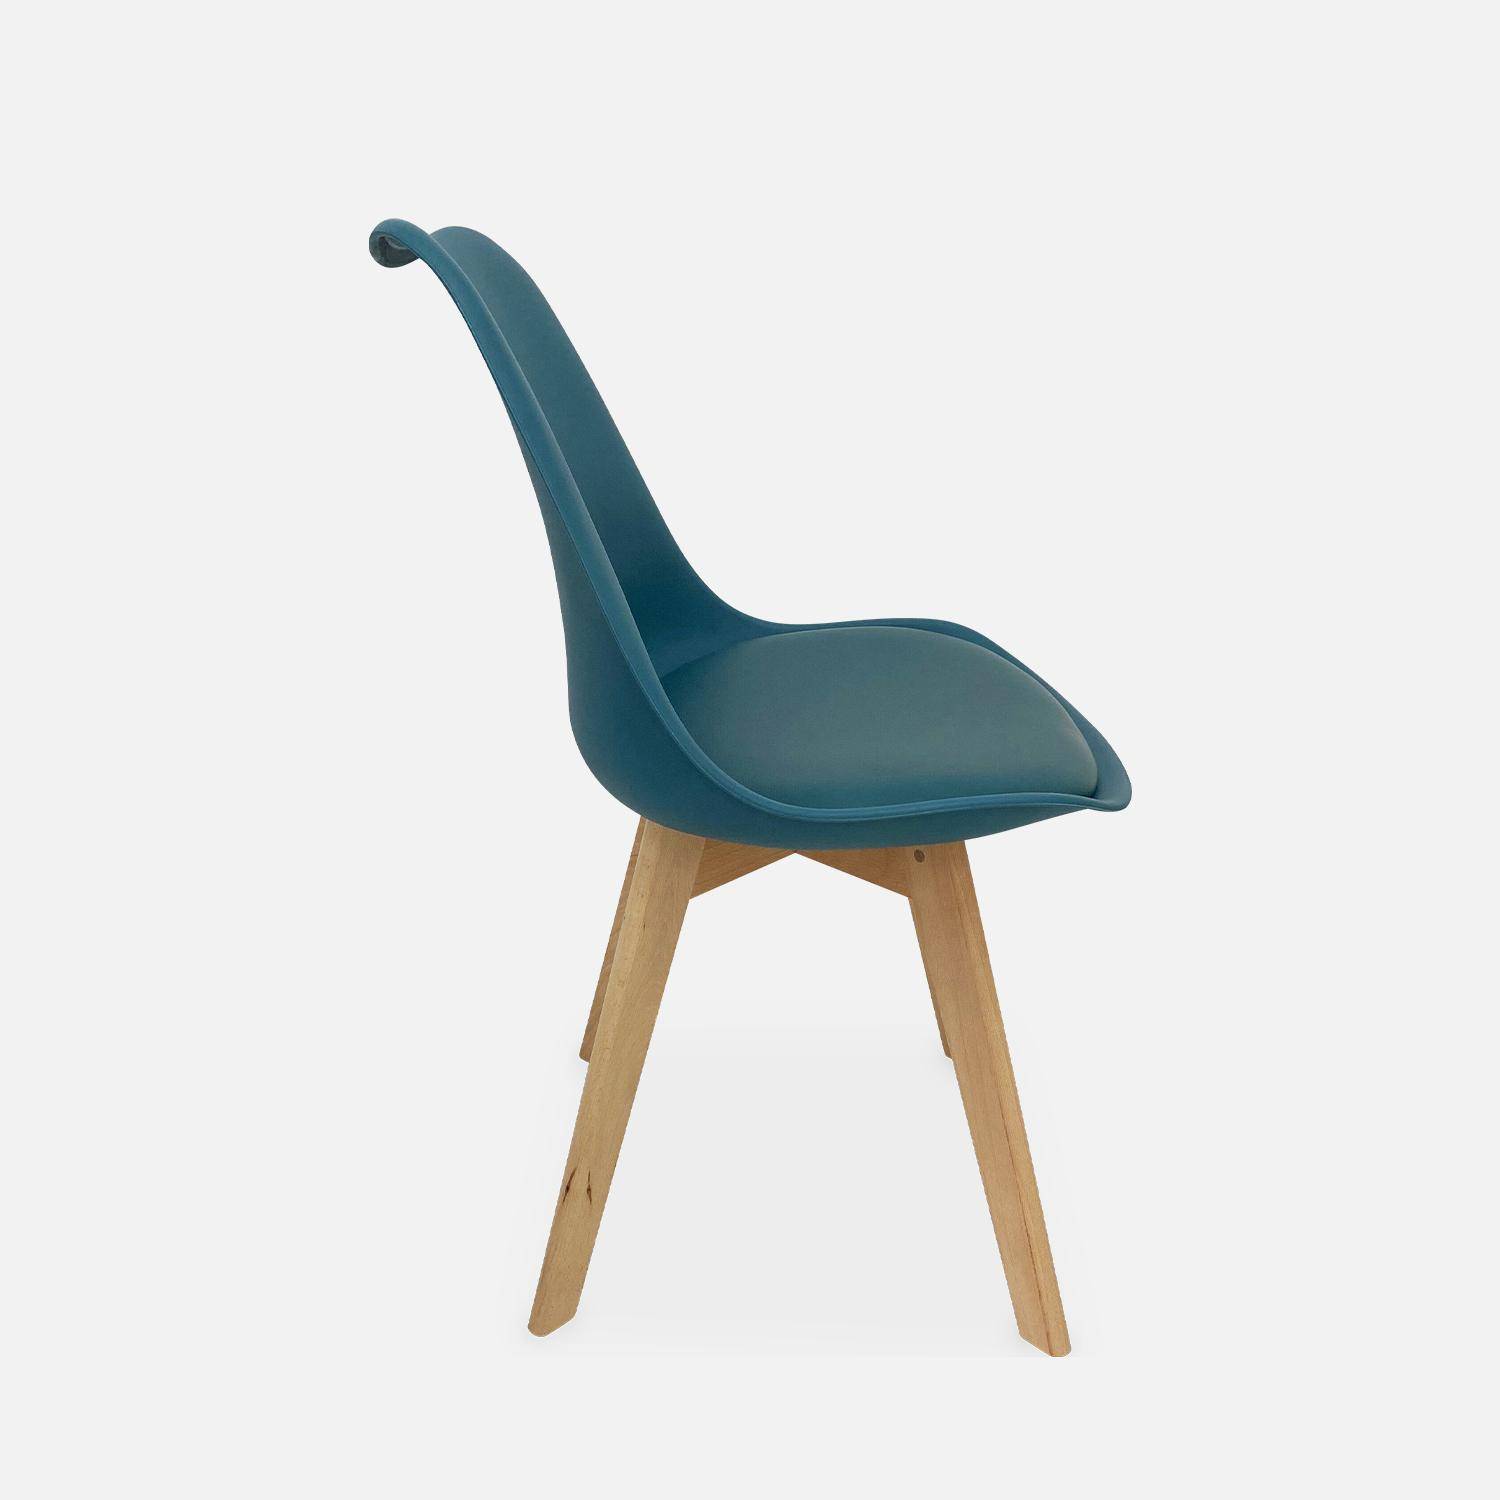 Pair of scandi-style faux-leather dining chair, blue, L49 x D55 x H81cm, NILS Photo3